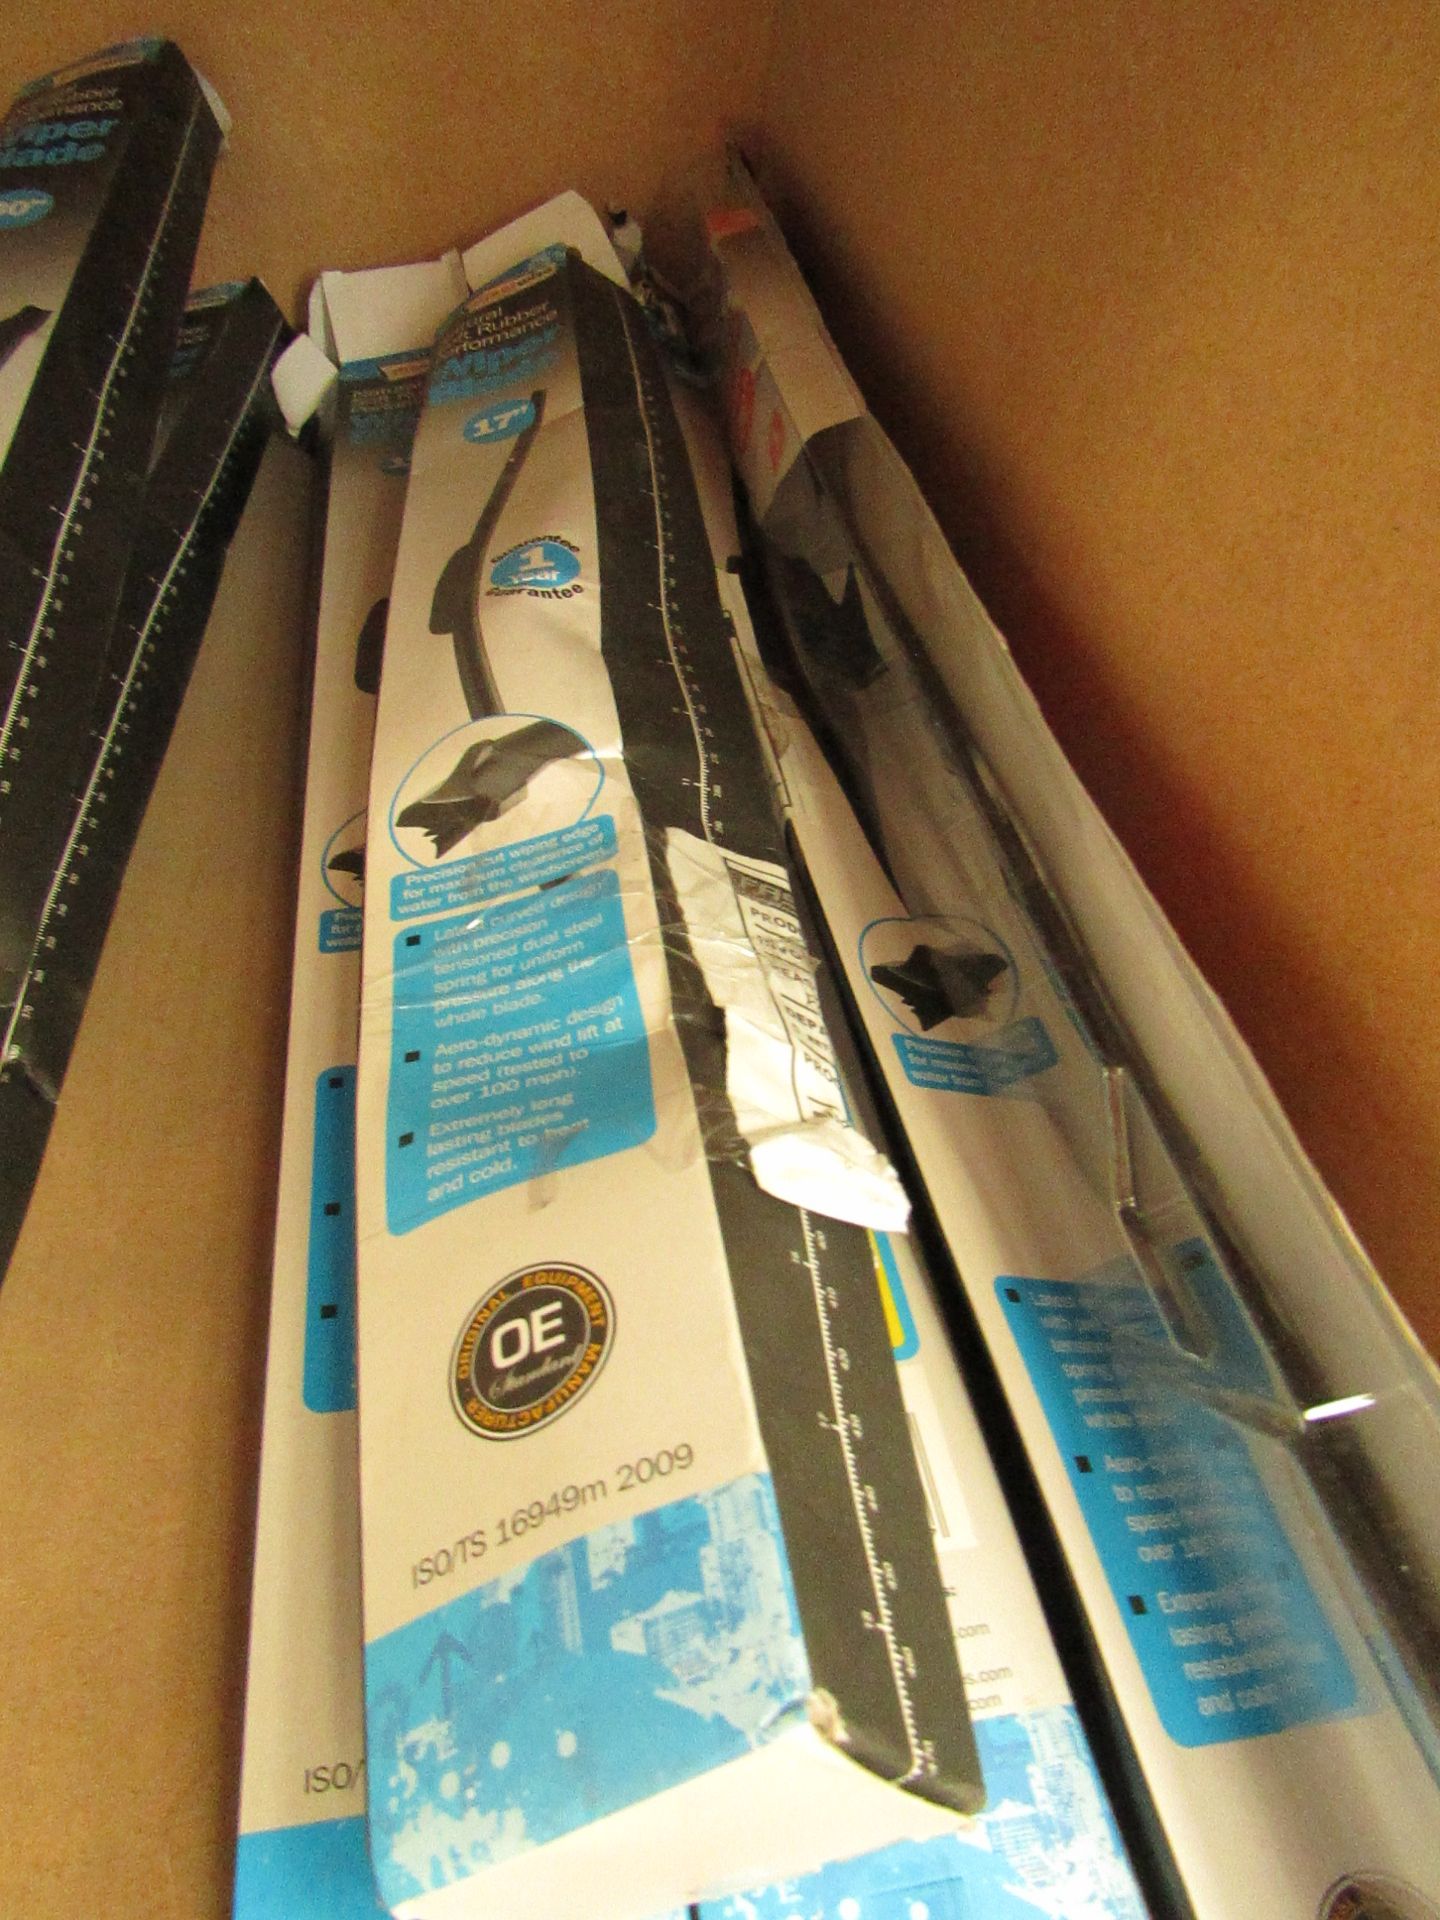 Lot of 5x various sized wiper blades (sizes include: 17", 18", 19", 23" and 28"), all unchecked